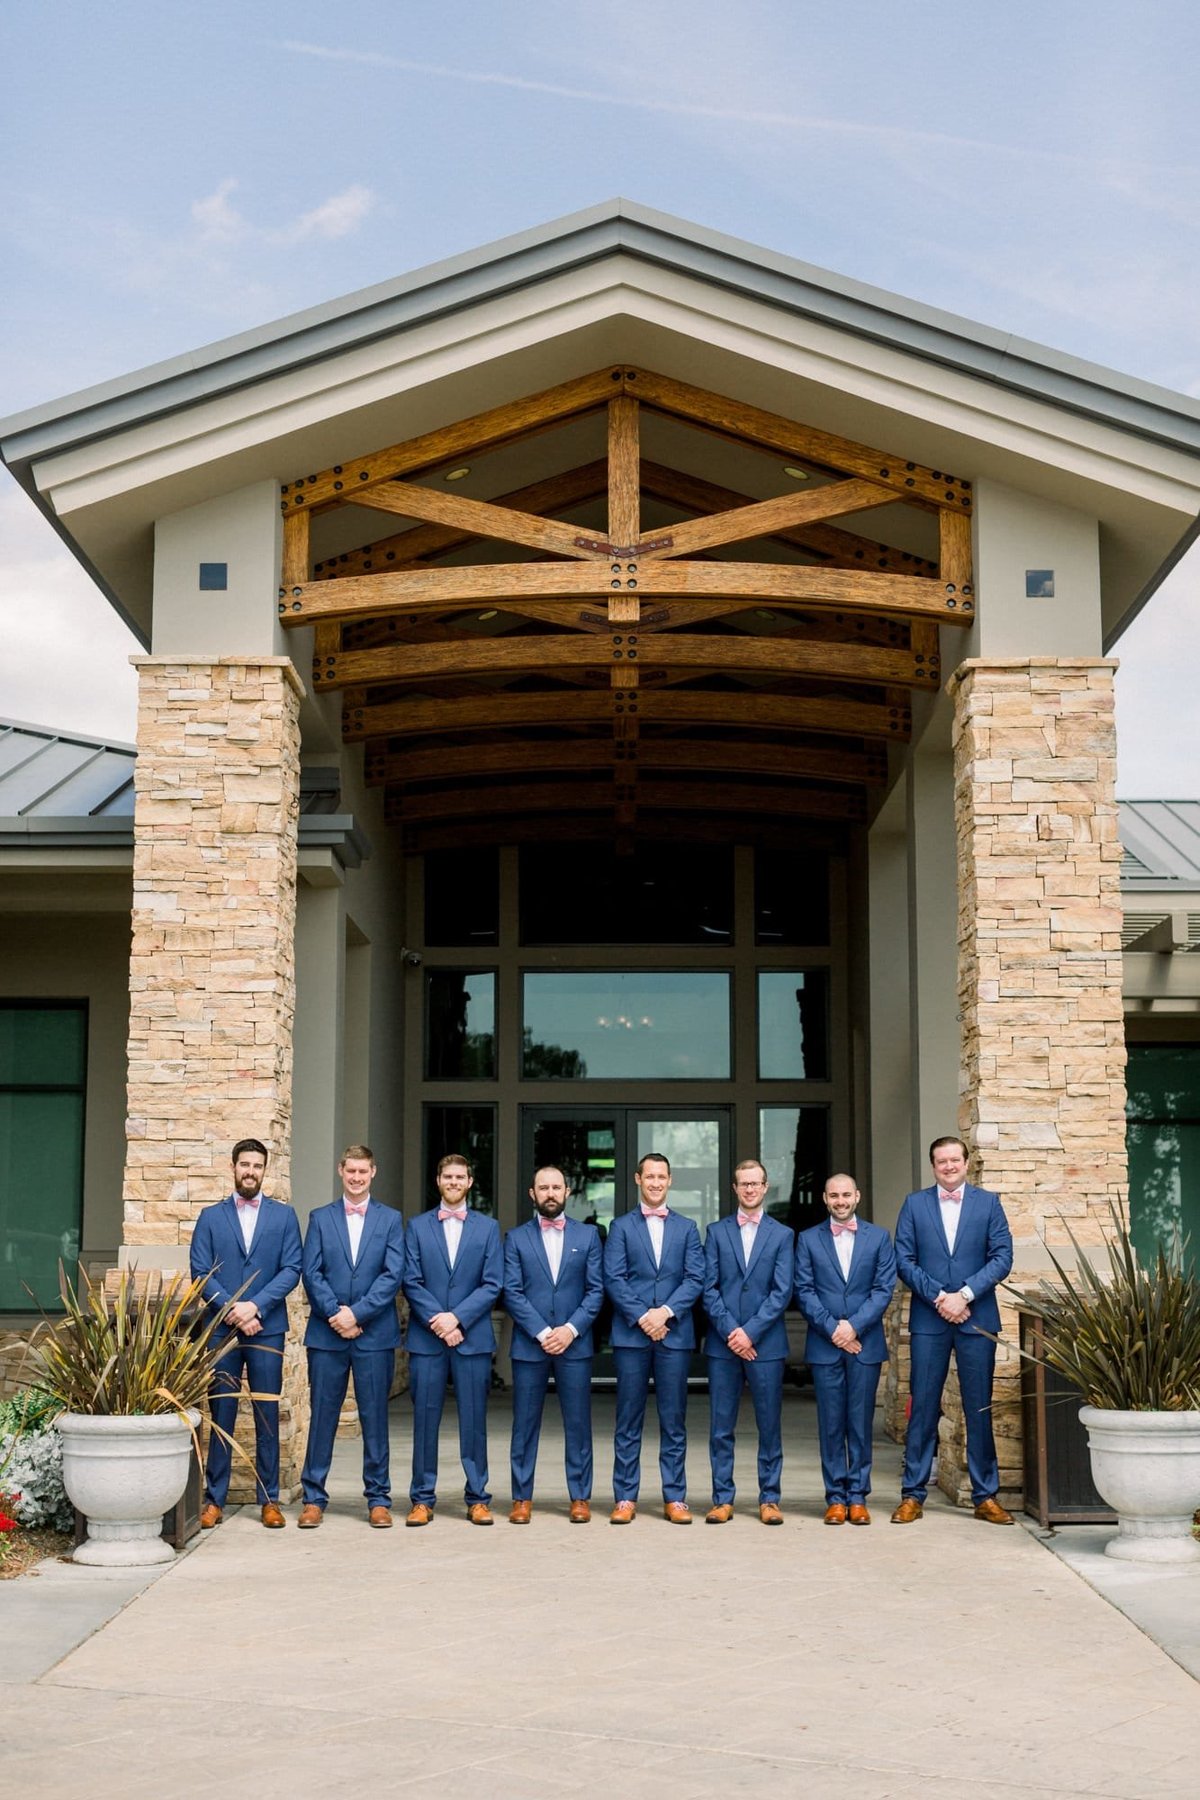 Groom poses with his groomsmen for photos